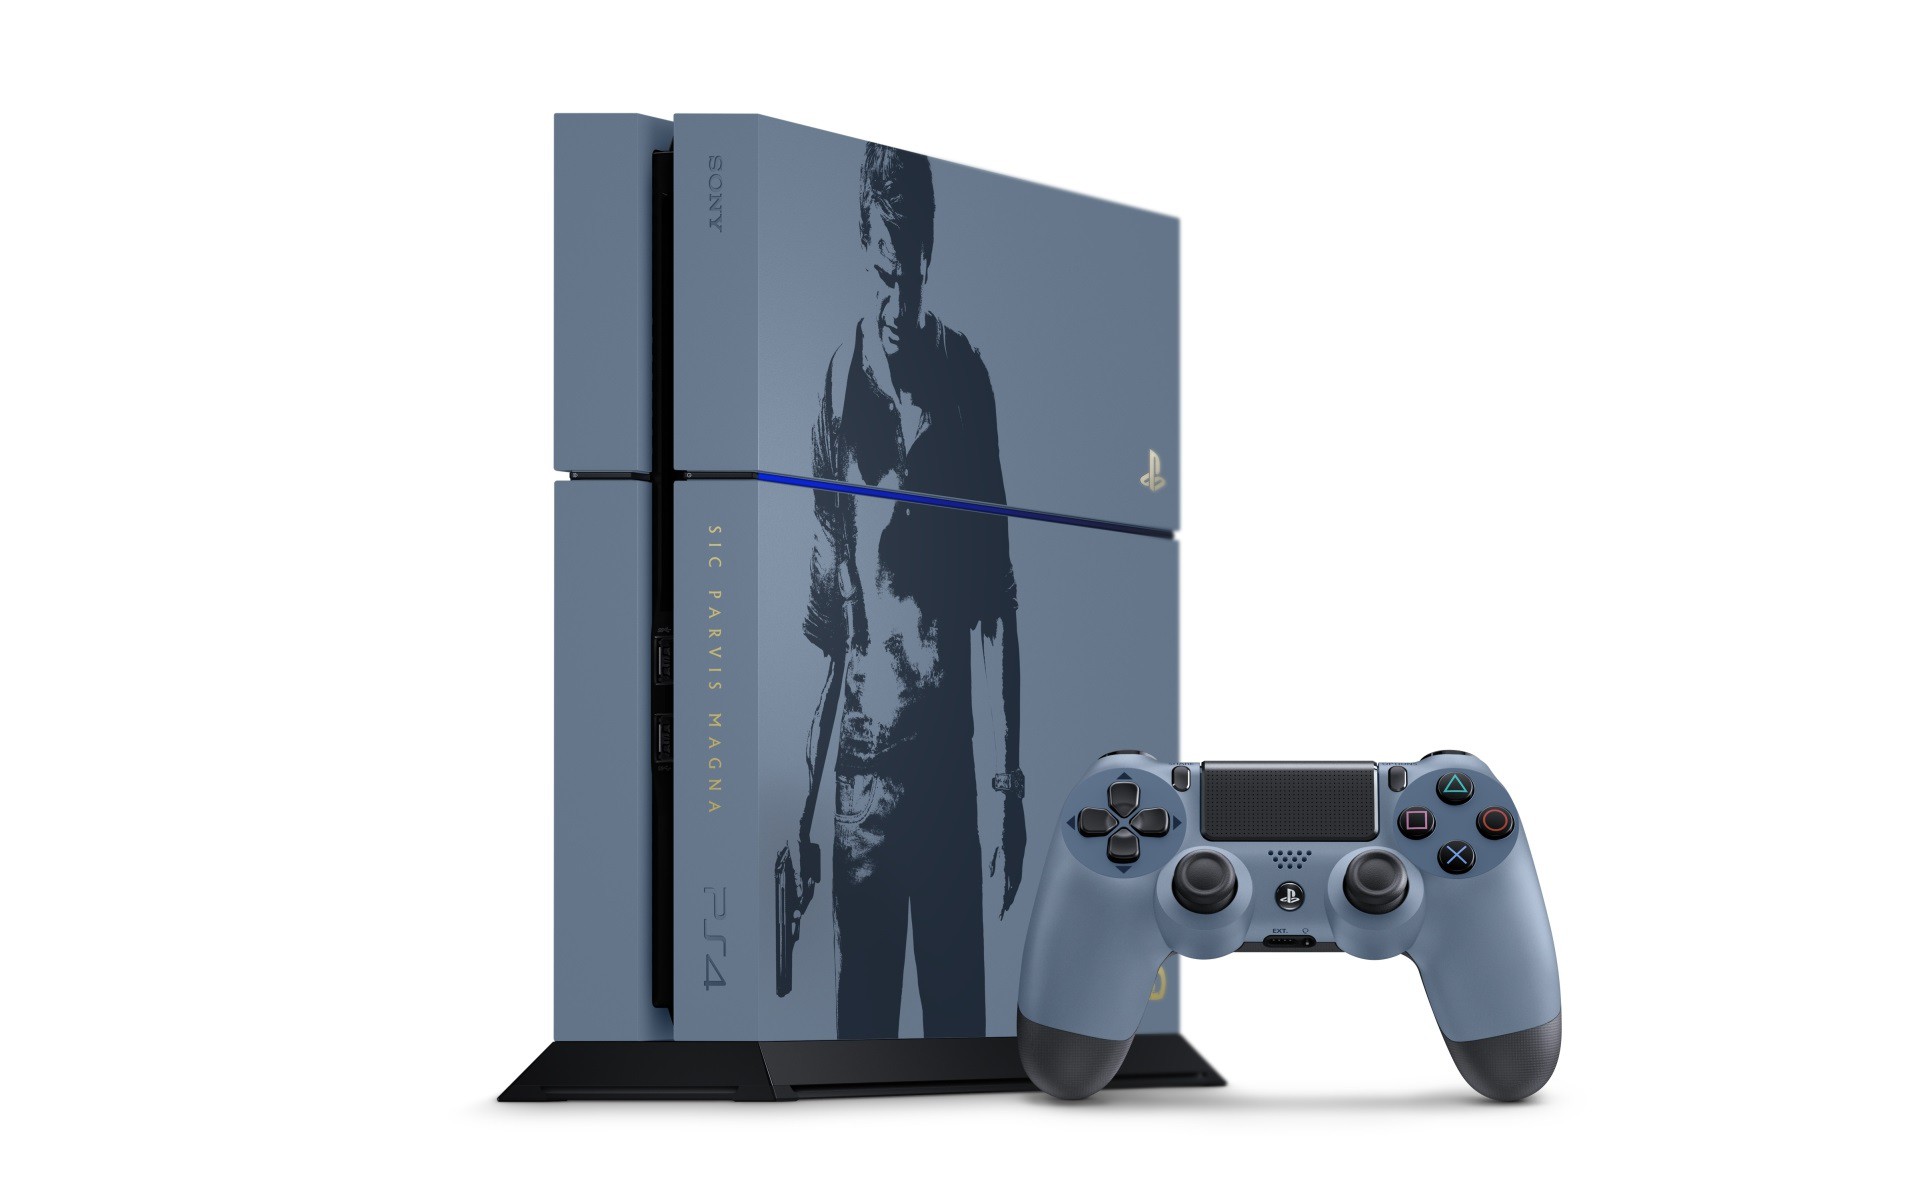 Ps4 namco. Ps4 Uncharted 4 Limited. Ps4 Uncharted 4 Limited Edition. Uncharted 4 ps4. PLAYSTATION 4 Uncharted Edition.